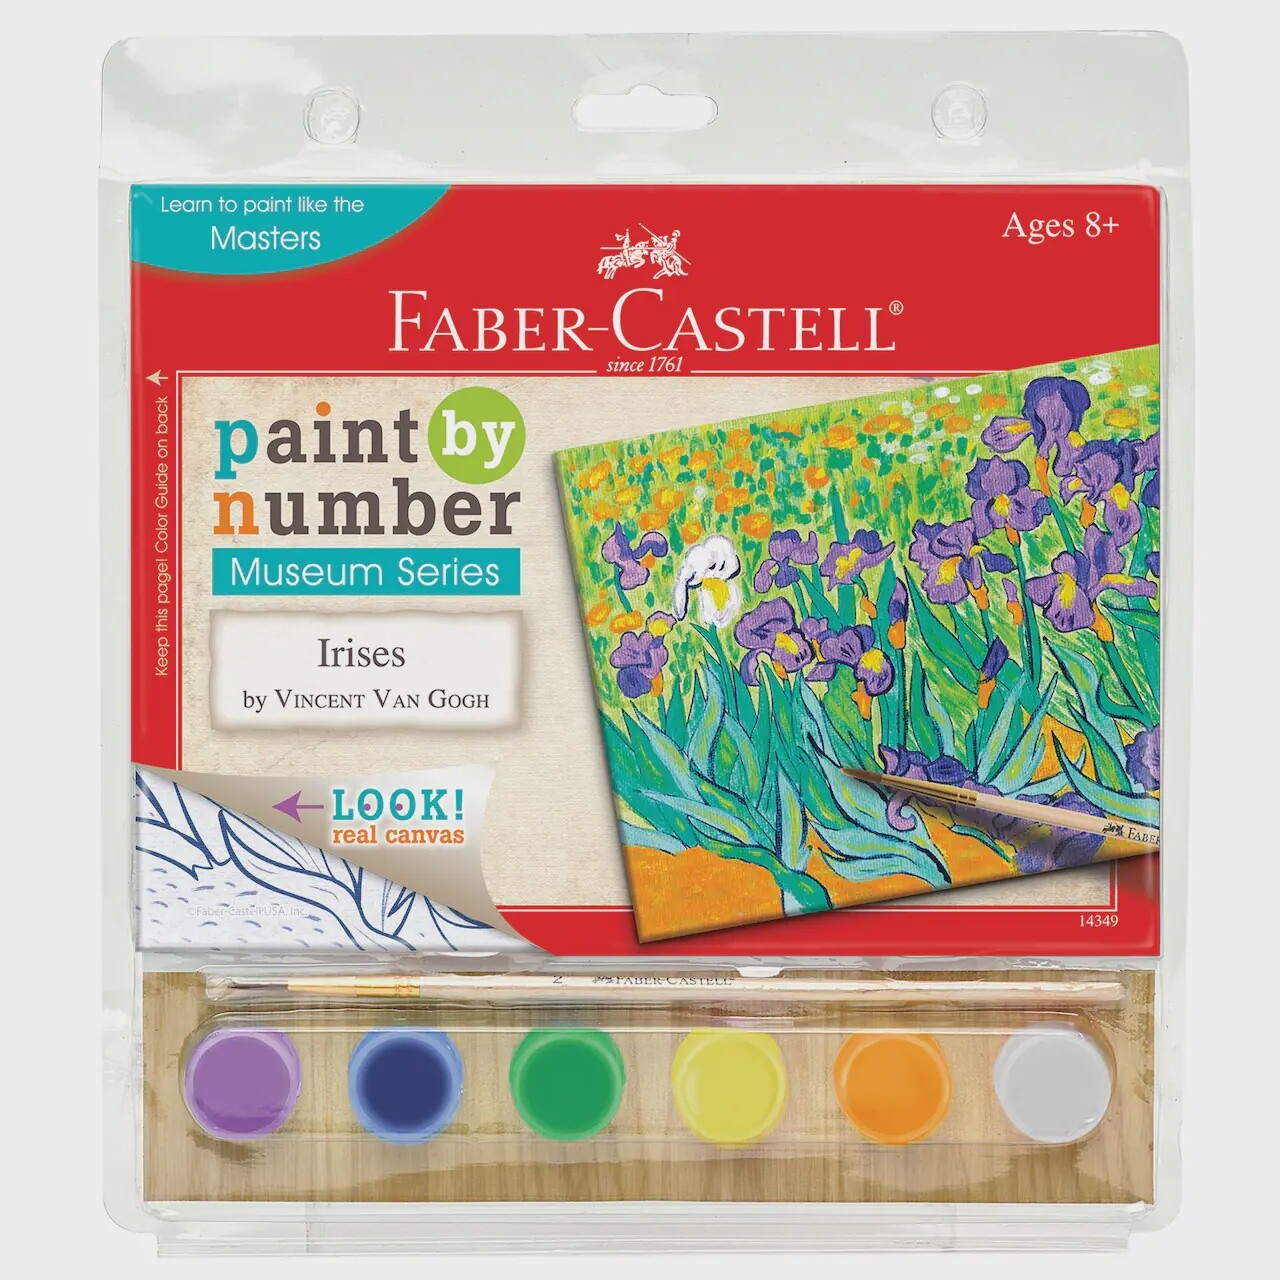 Faber-Castell Paint By Number Museum Series Irises